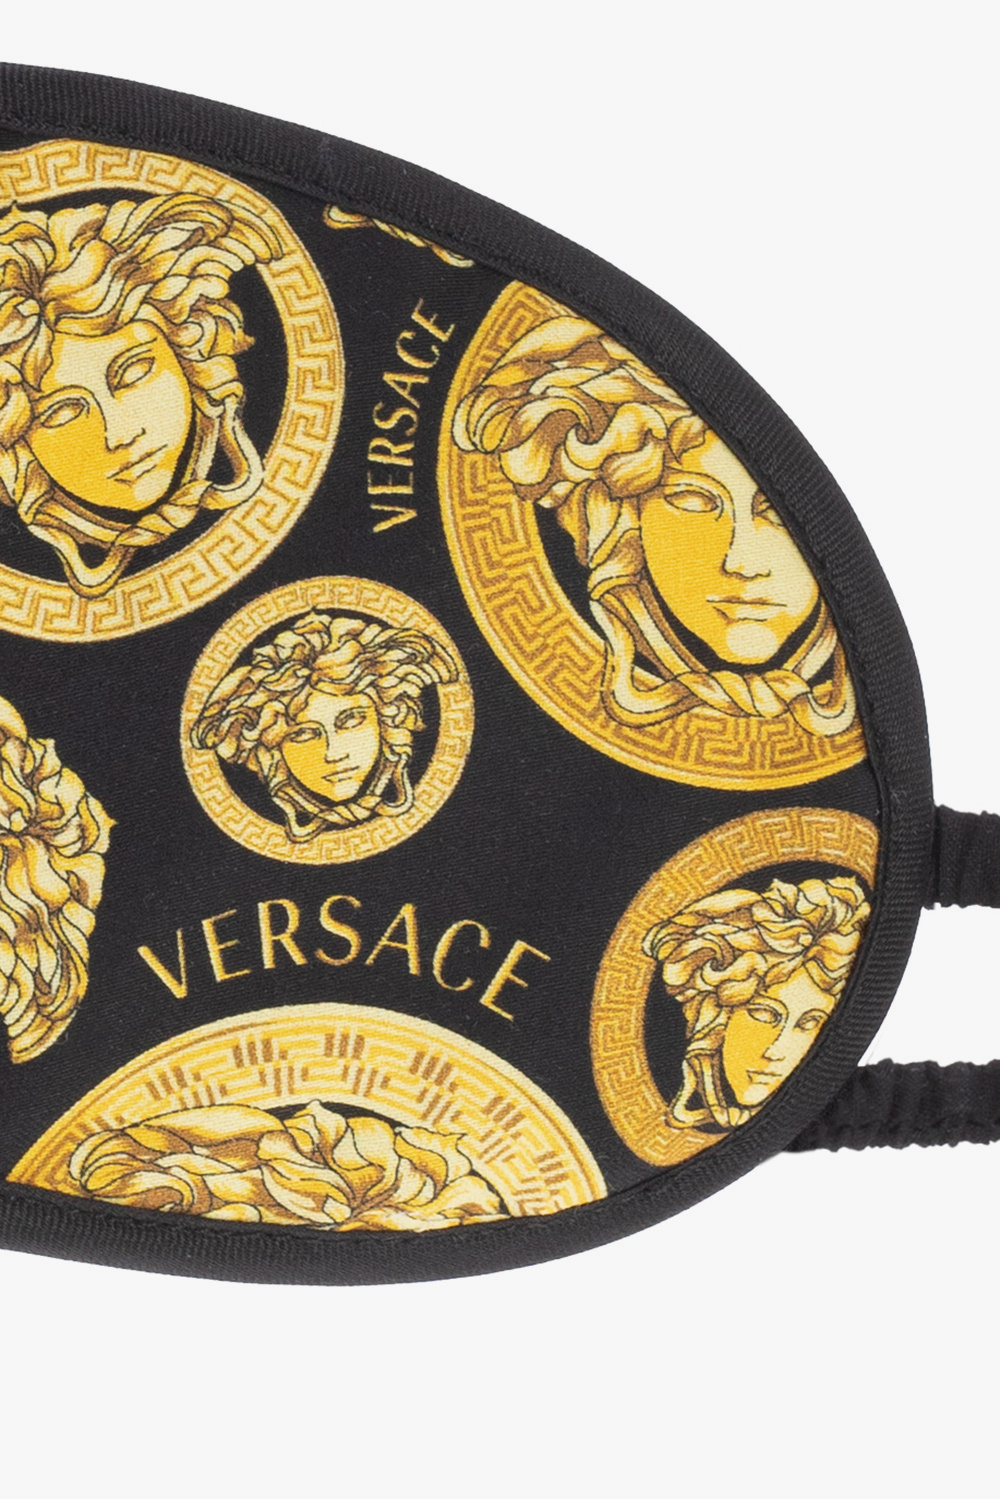 Versace Home Launches The NB Face mask V3